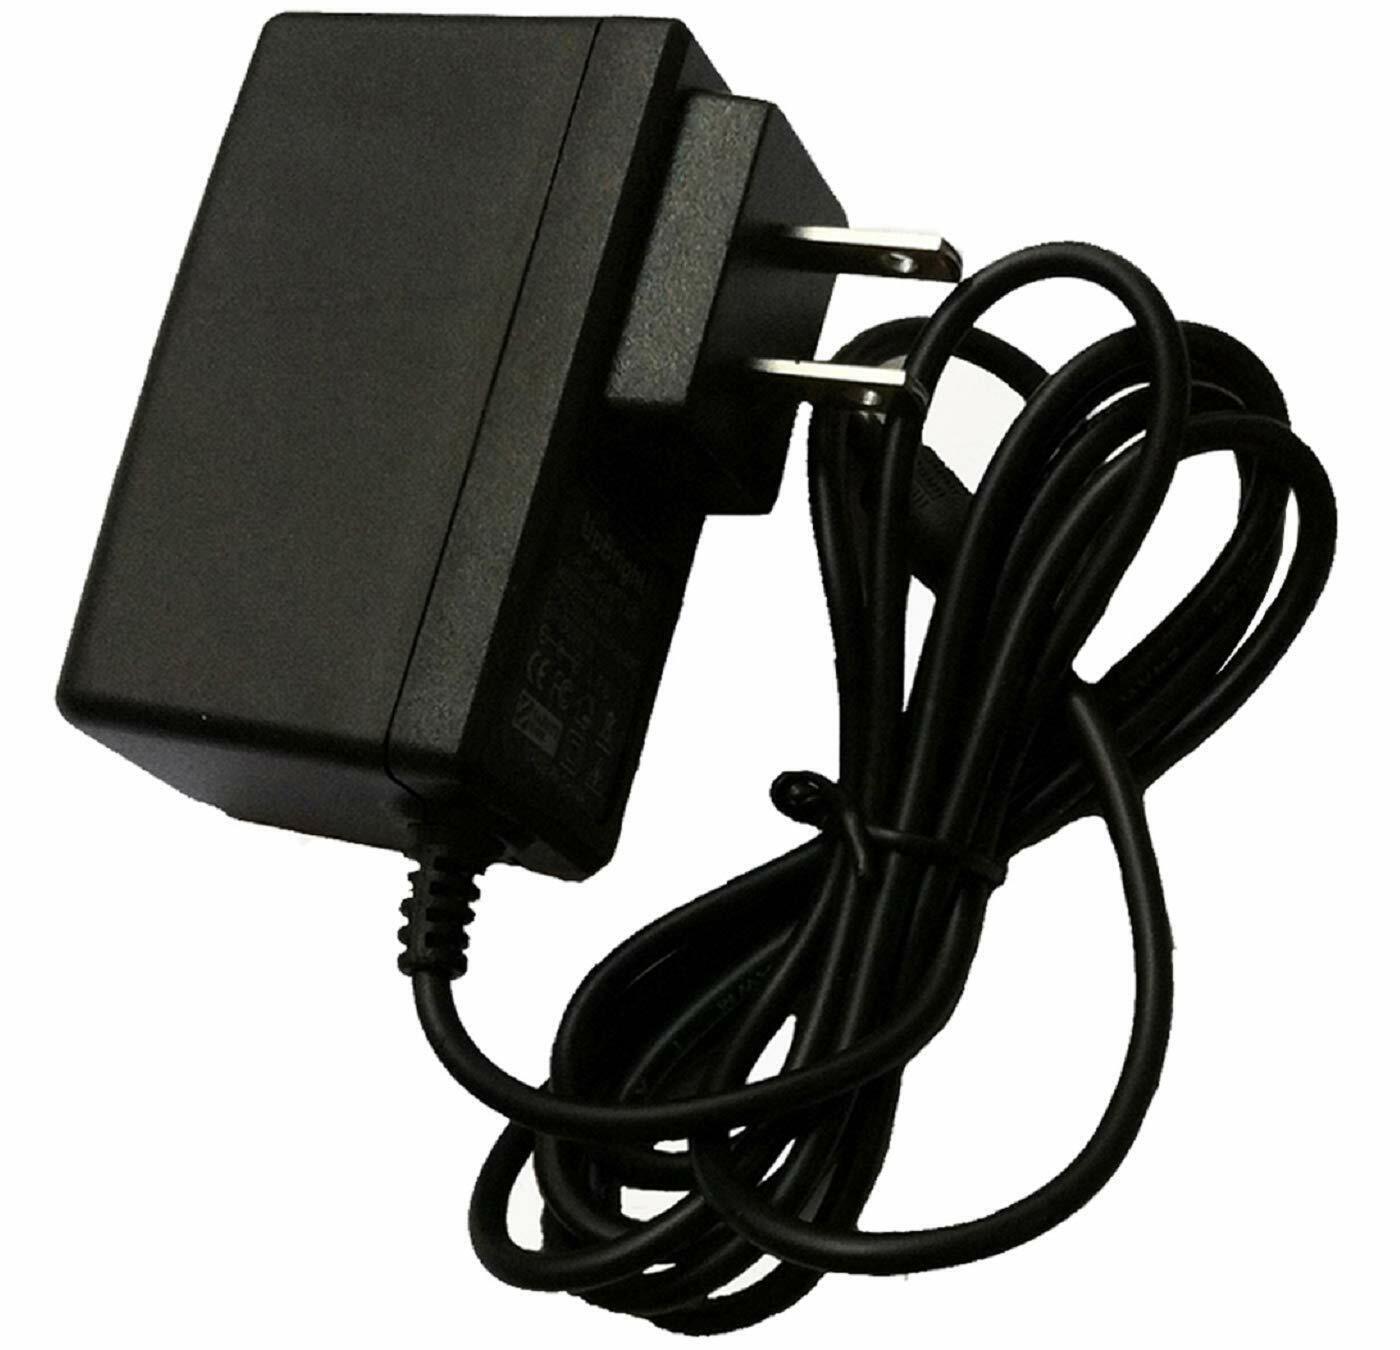 Primary image for Adapter For Doctor Who Tardis Usb Hub Dr115 7.5Vdc Power Supply Cord Cable Ps